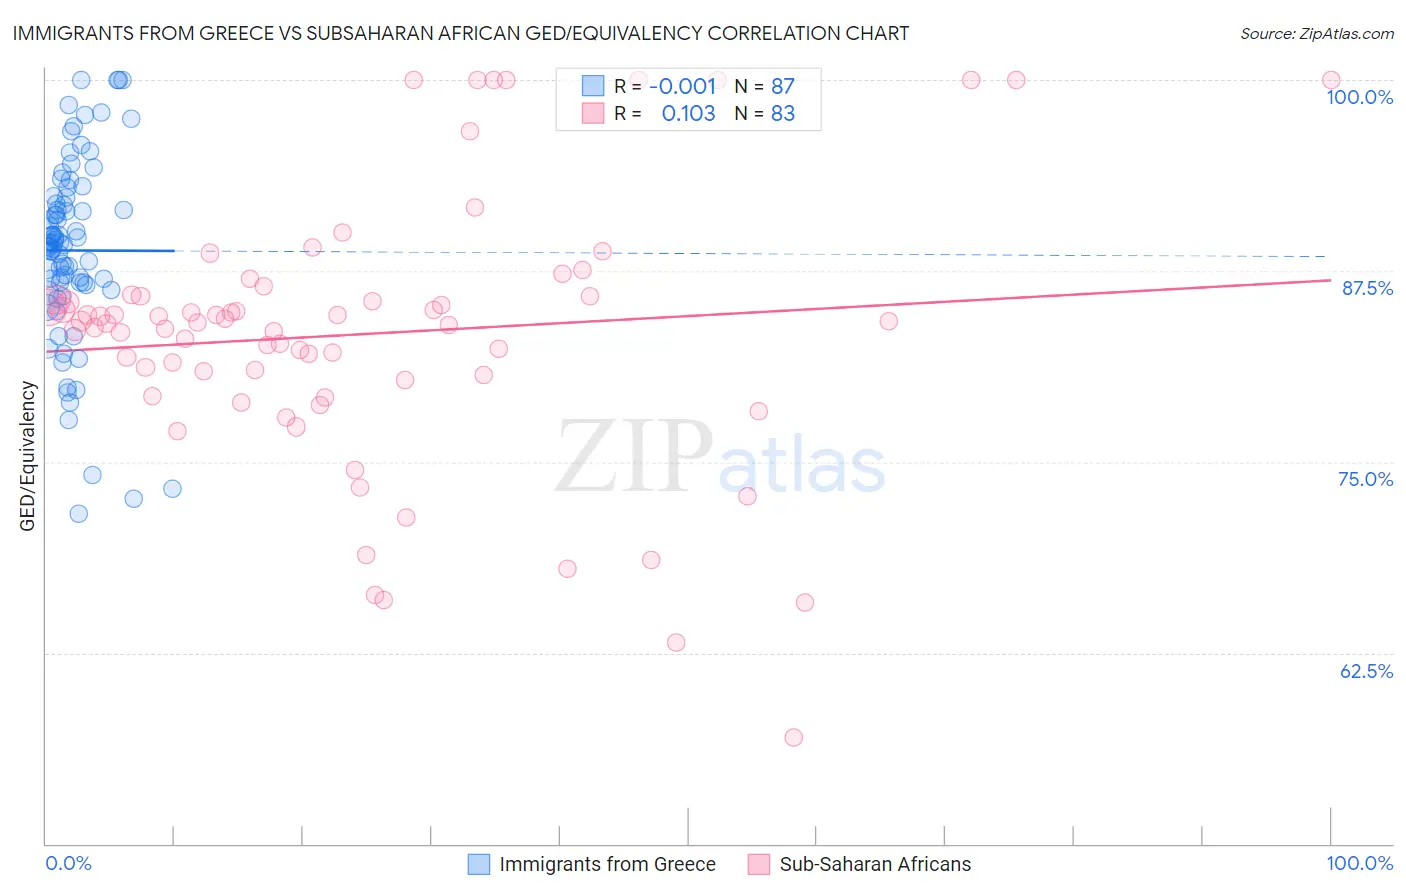 Immigrants from Greece vs Subsaharan African GED/Equivalency